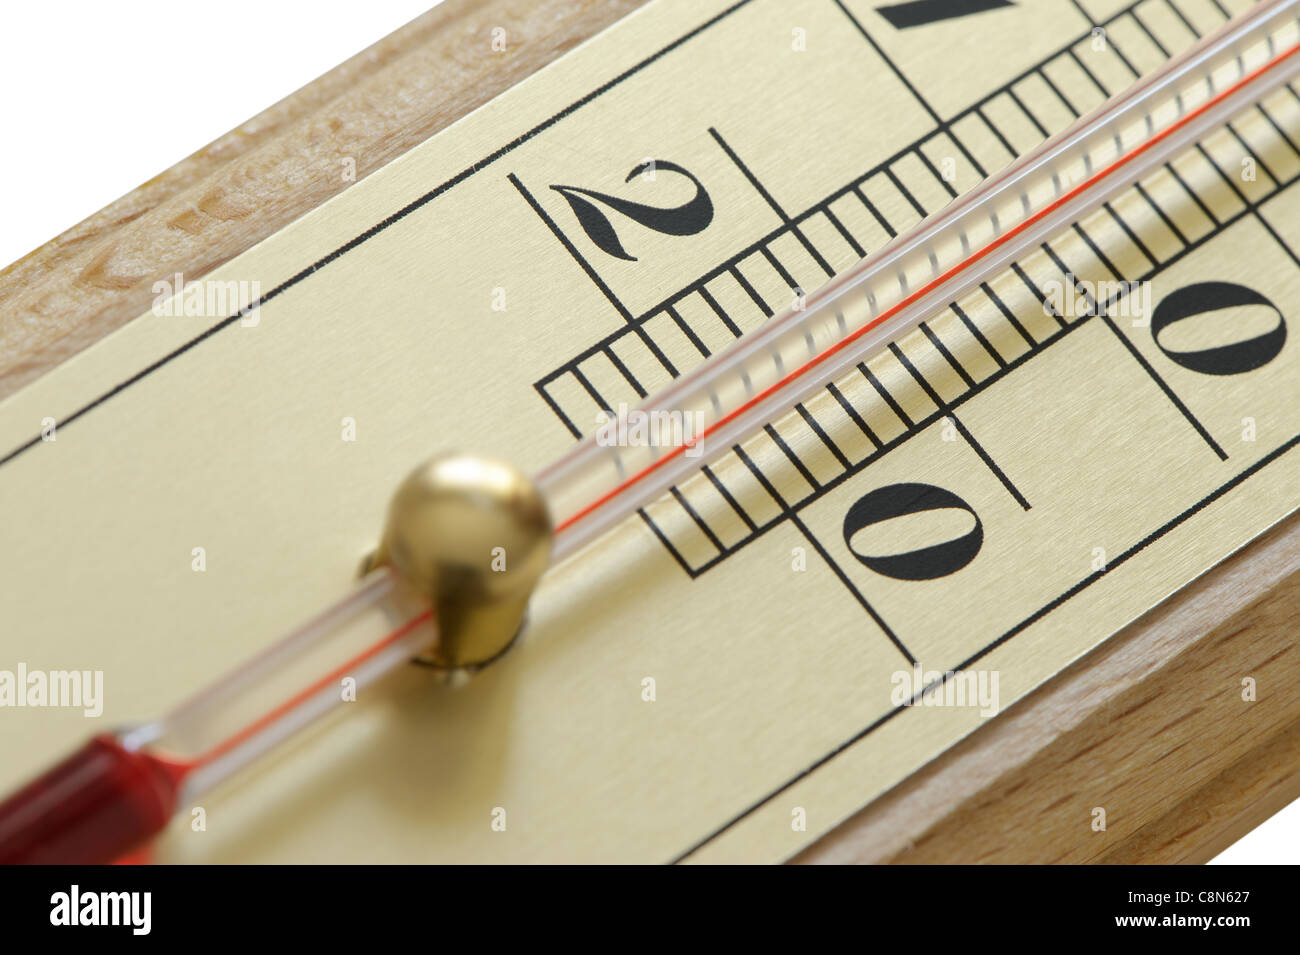 Double scale alcohol thermometer with ambient temperature plus 23 Celsius  or 73 Fahrenheit degrees. Silver plastic vertical air thermometer isolated  Stock Photo - Alamy